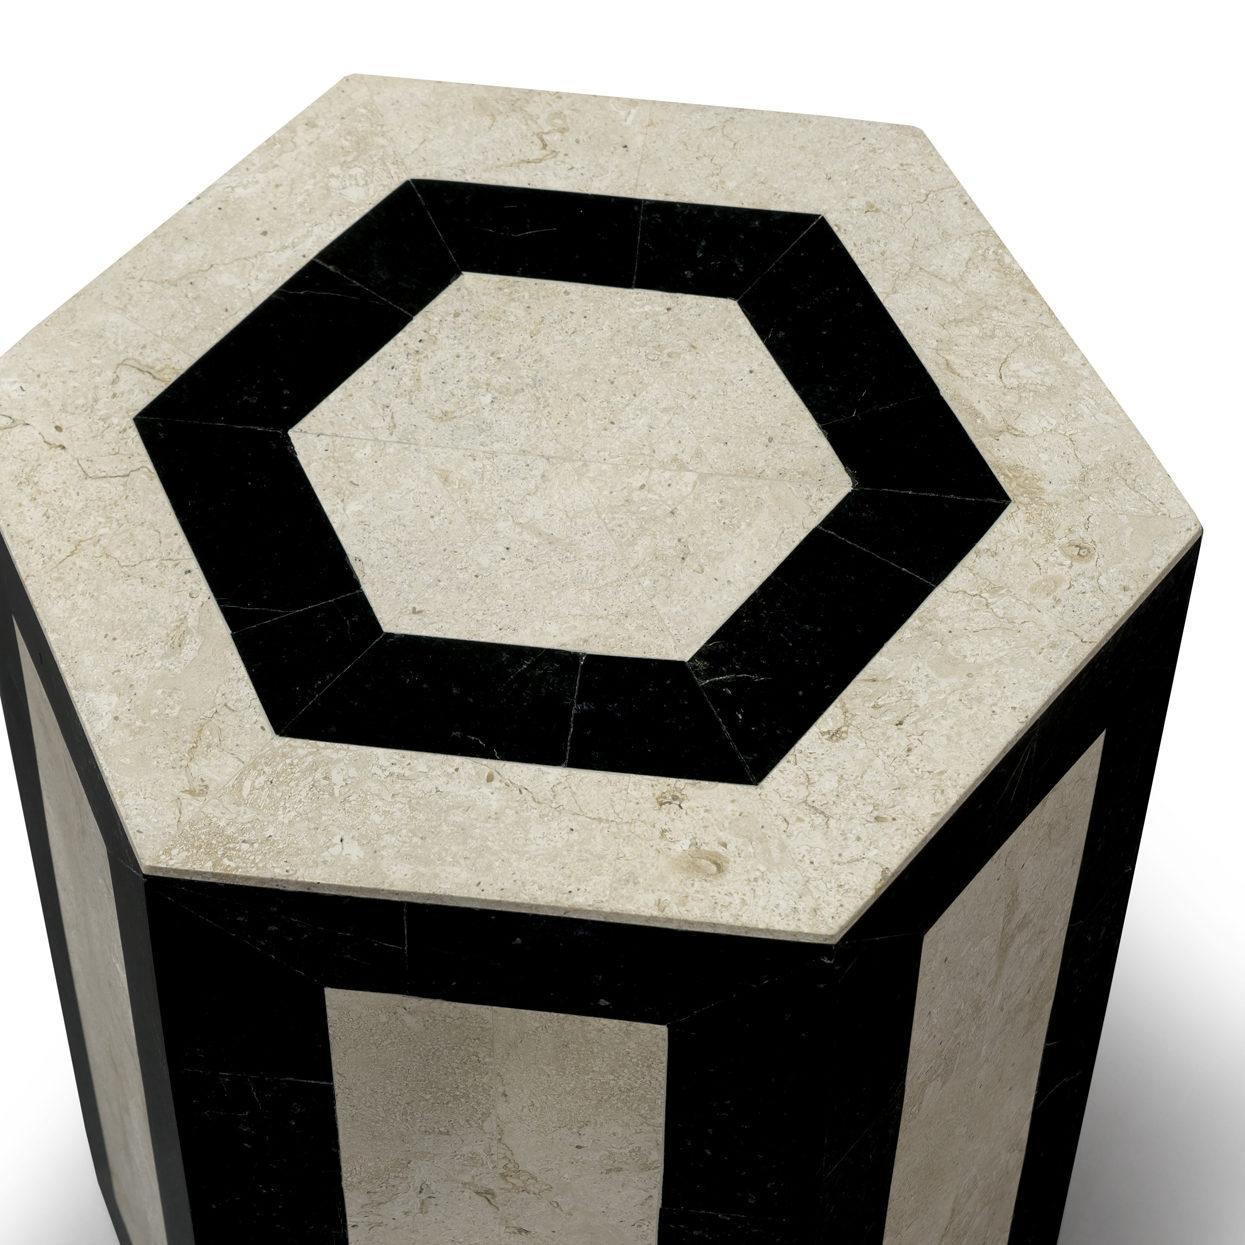 North American Set of 2 Laser Cut Stone Geometric Side Tables in Black and Cream